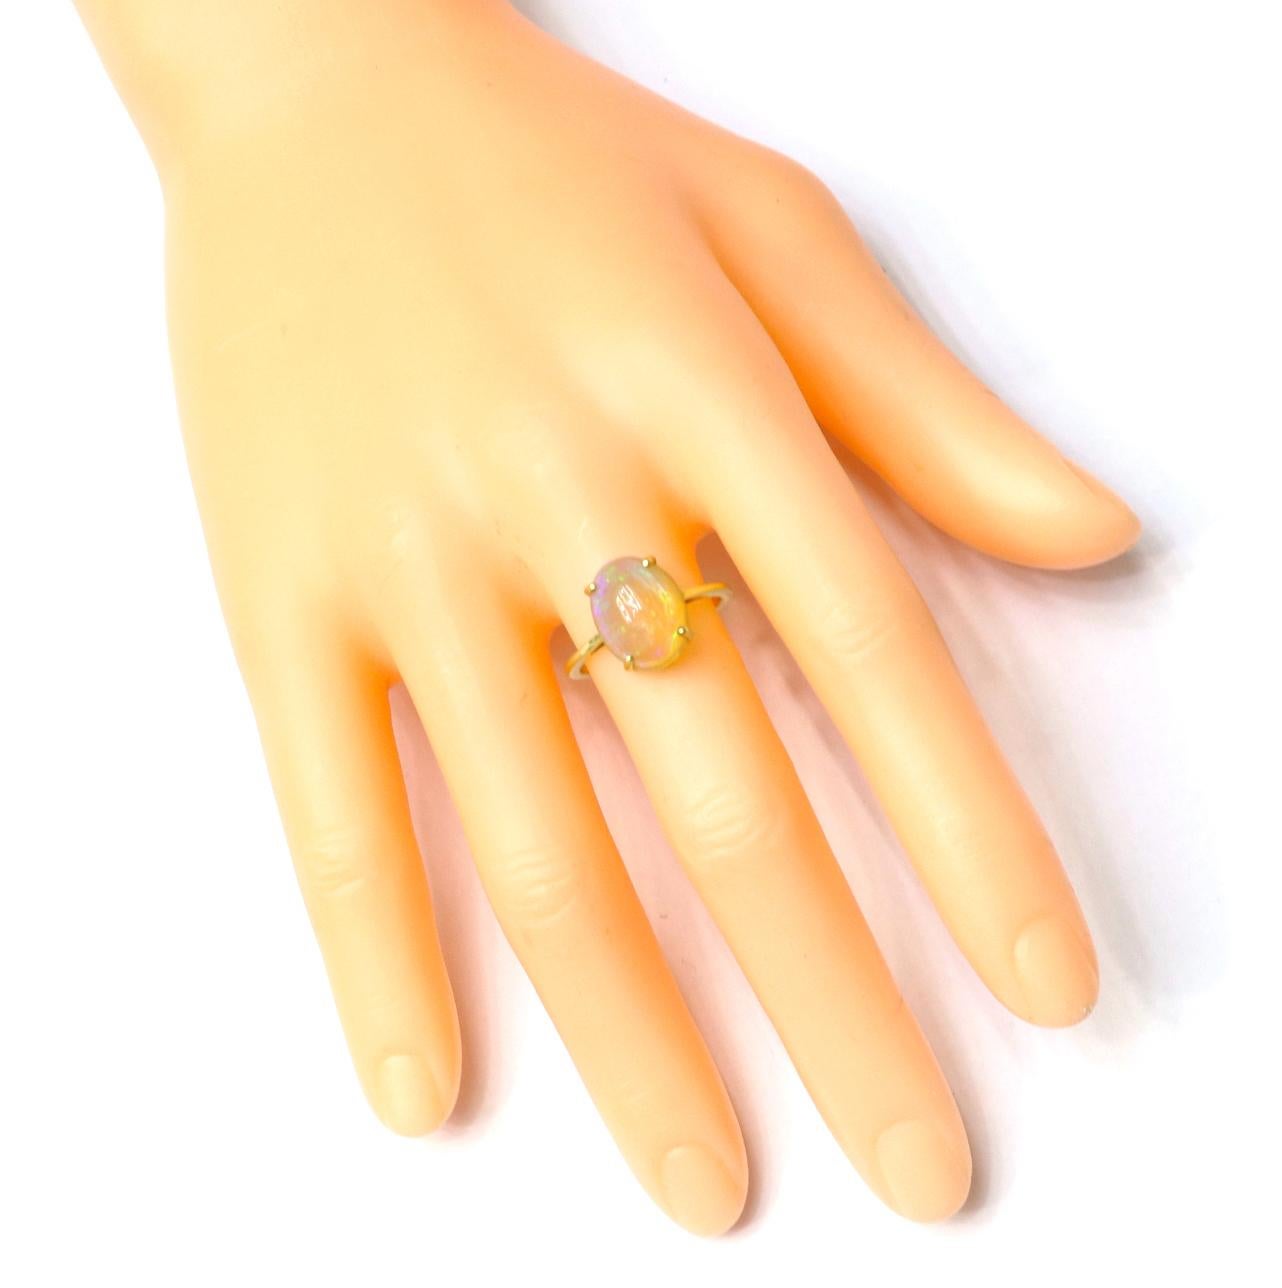 18 Karat Yellow Gold 3.71 Carat Opal Solitaire Ring

This statement Opal Ring draws its inspiration from the Moon. Featuring an Oval-Cut Opal and set in a Four-Prong Setting, it glistens like the moon. Finished with a yellow gold band for a seamless